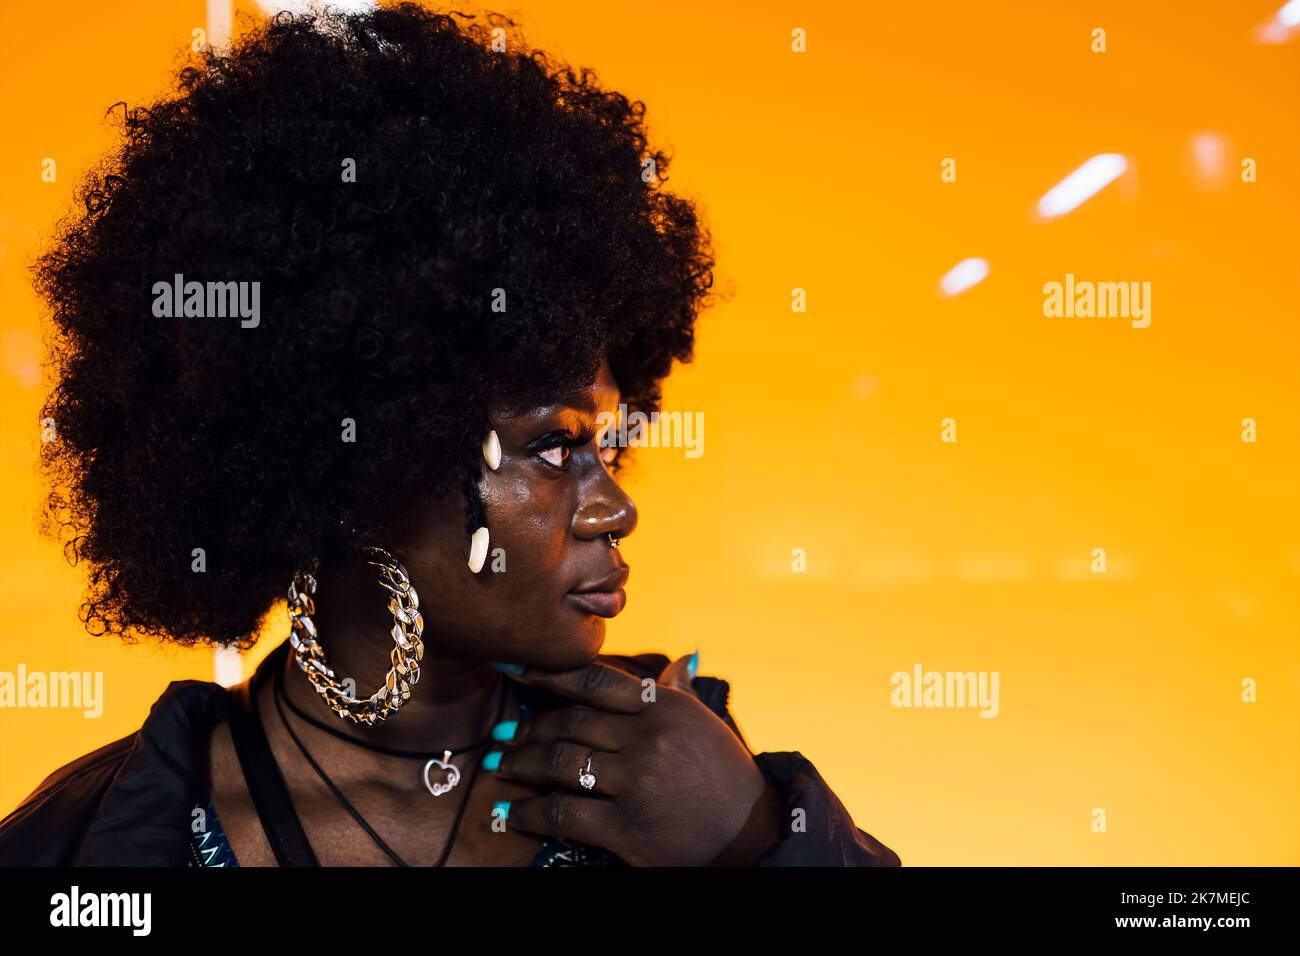 African woman's face with yellow light and traditional African hair Stock Photo